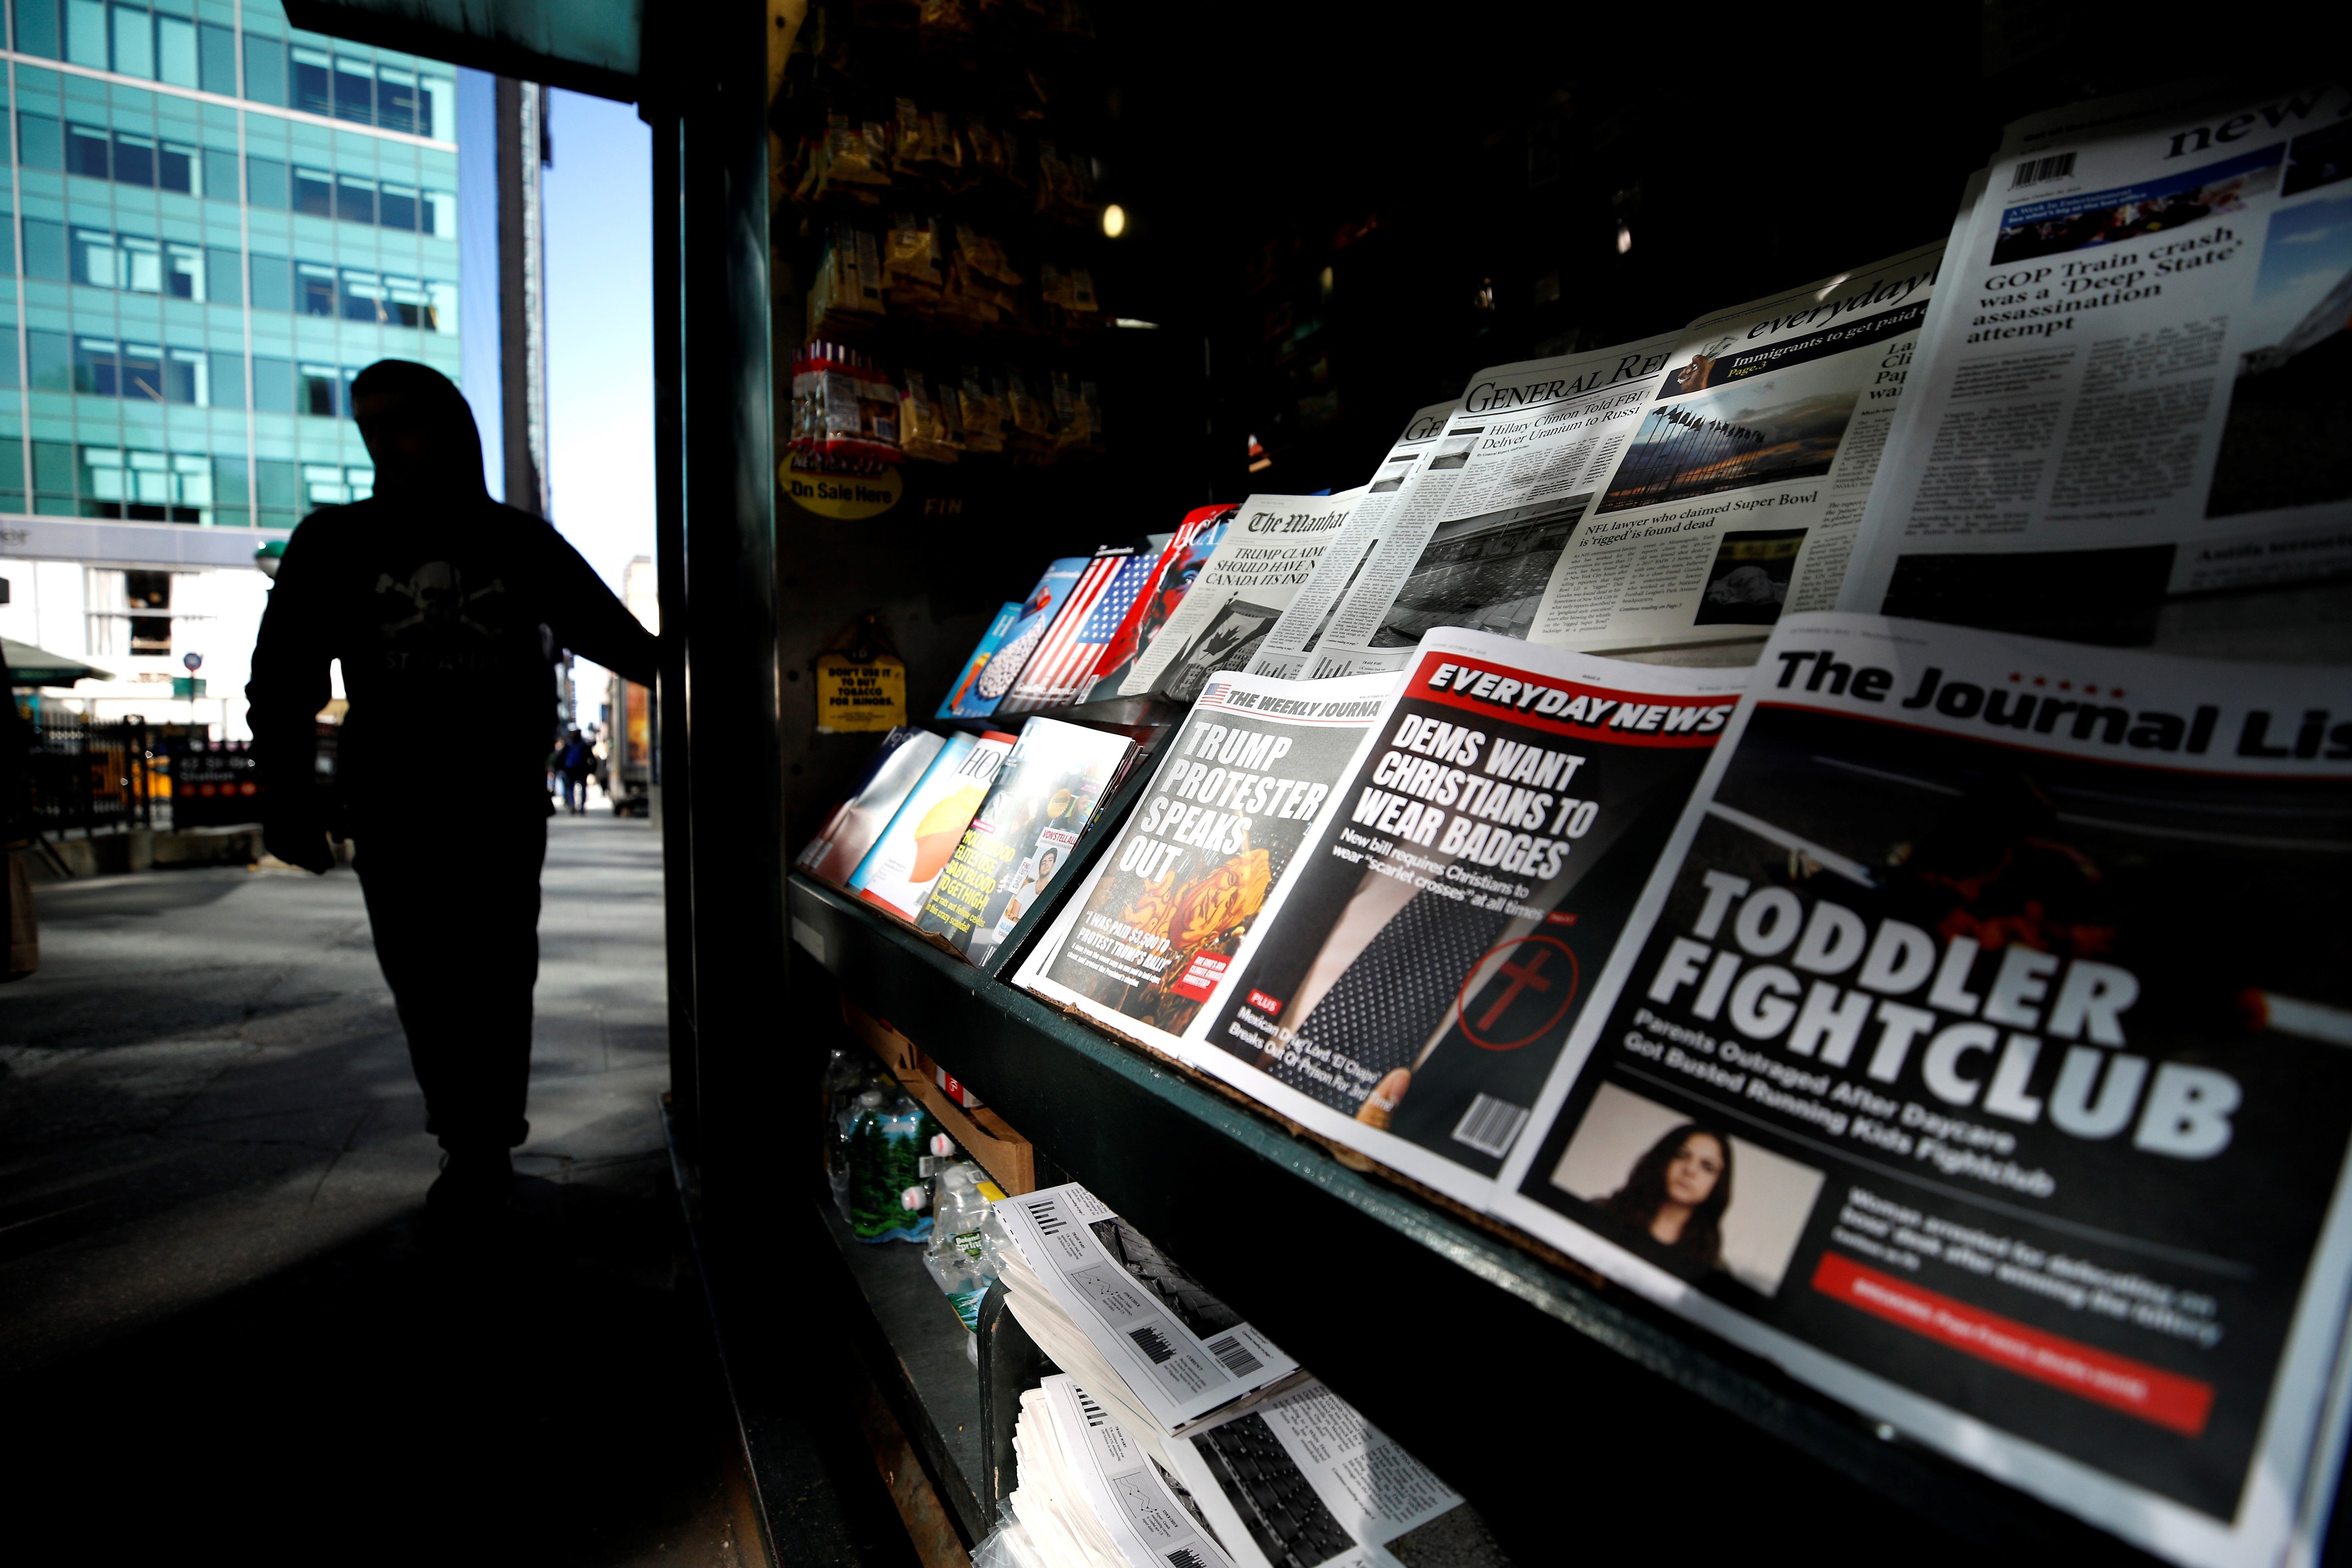 A misinformation news stand is seen in Manhattan, New York on October 30, 2018. (Atilgan Ozdil—Anadolu Agency/Getty Images)